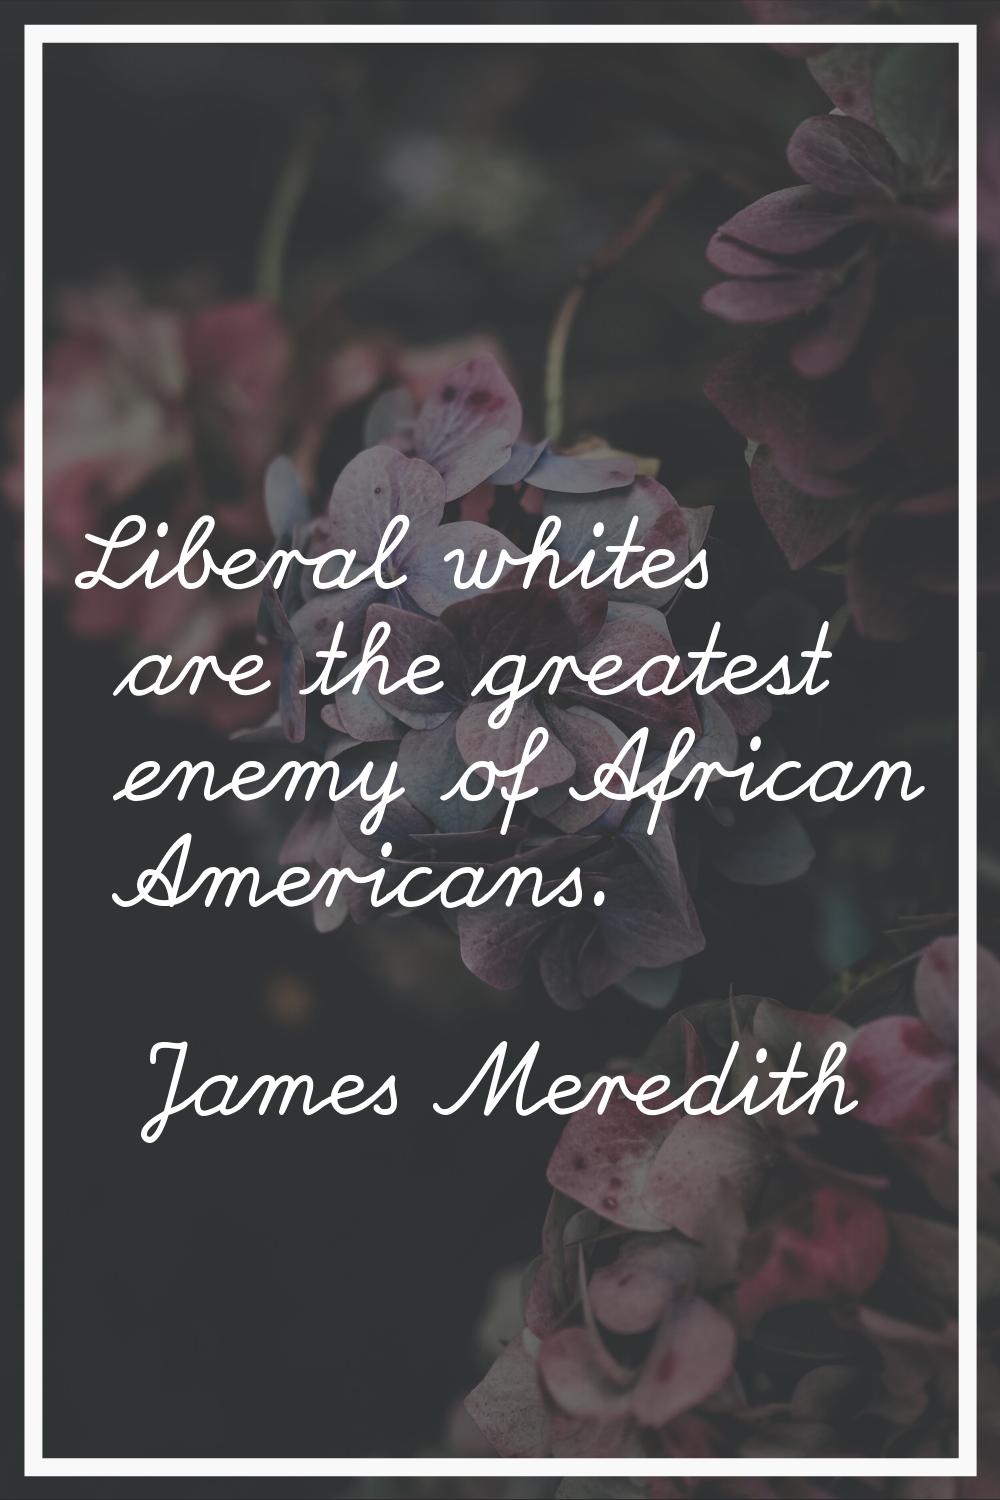 Liberal whites are the greatest enemy of African Americans.